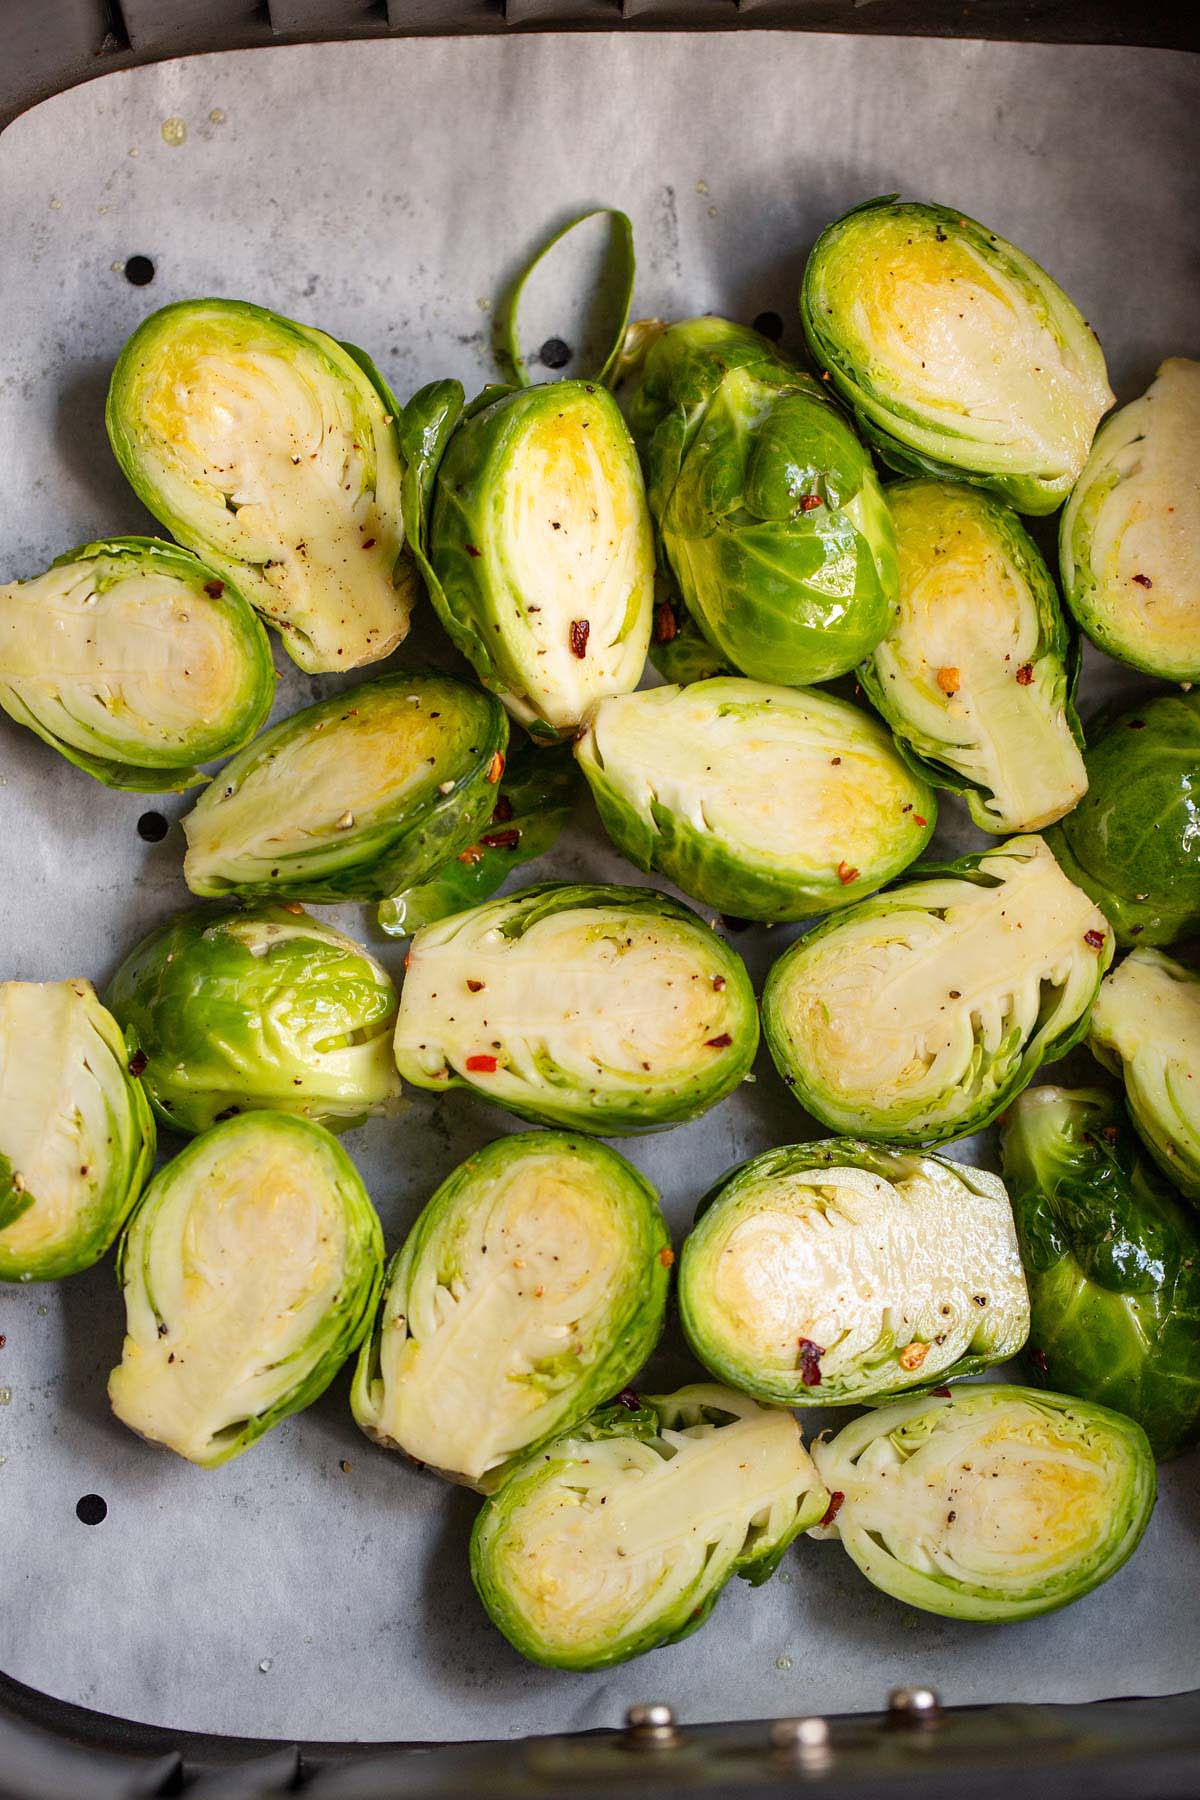 Uncooked brussels sprouts in air fryer.